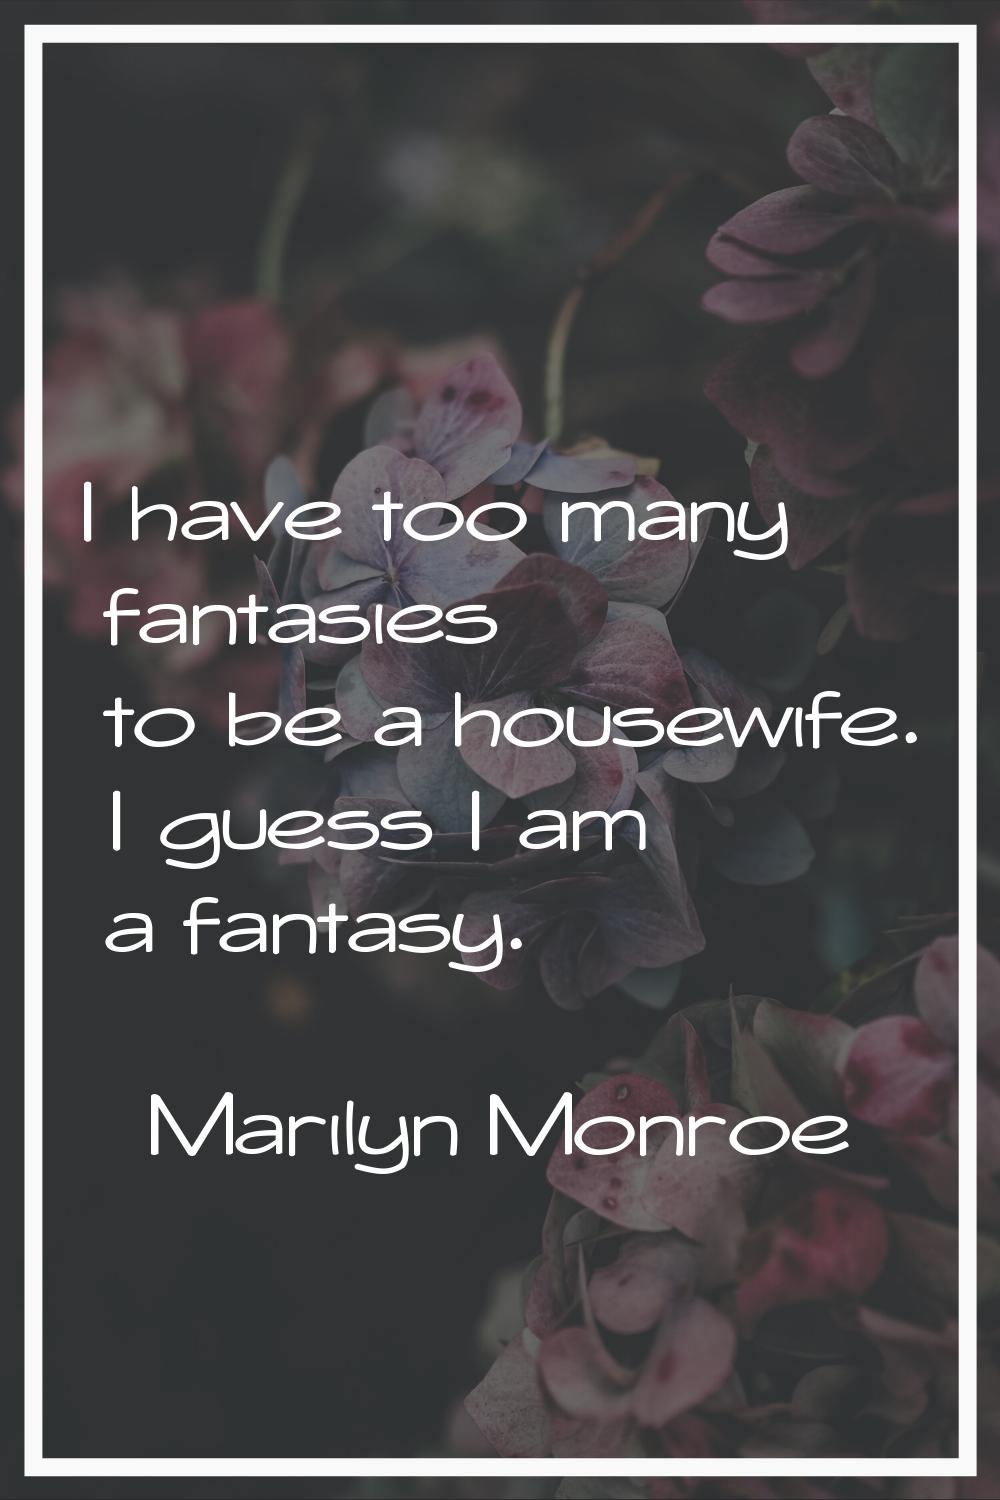 I have too many fantasies to be a housewife. I guess I am a fantasy.